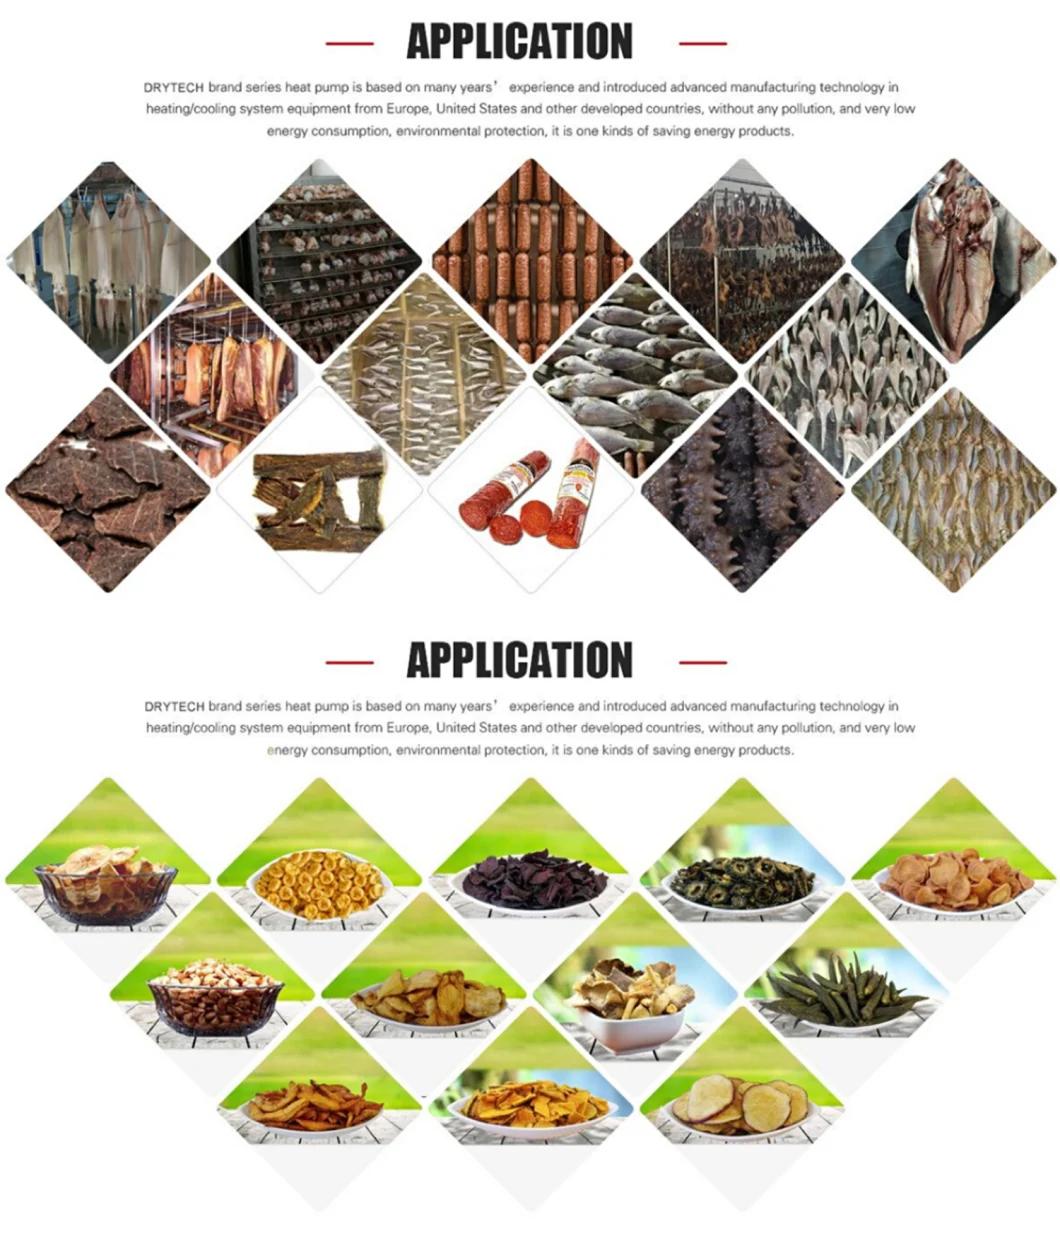 China High Quality Fruit Apple Beef Blueberry Bamboo Coconut Cashew Chili Pepper Dates Dog Feed Fish Fig Ginger Garlic Banana Agriculture Food Drying Machine